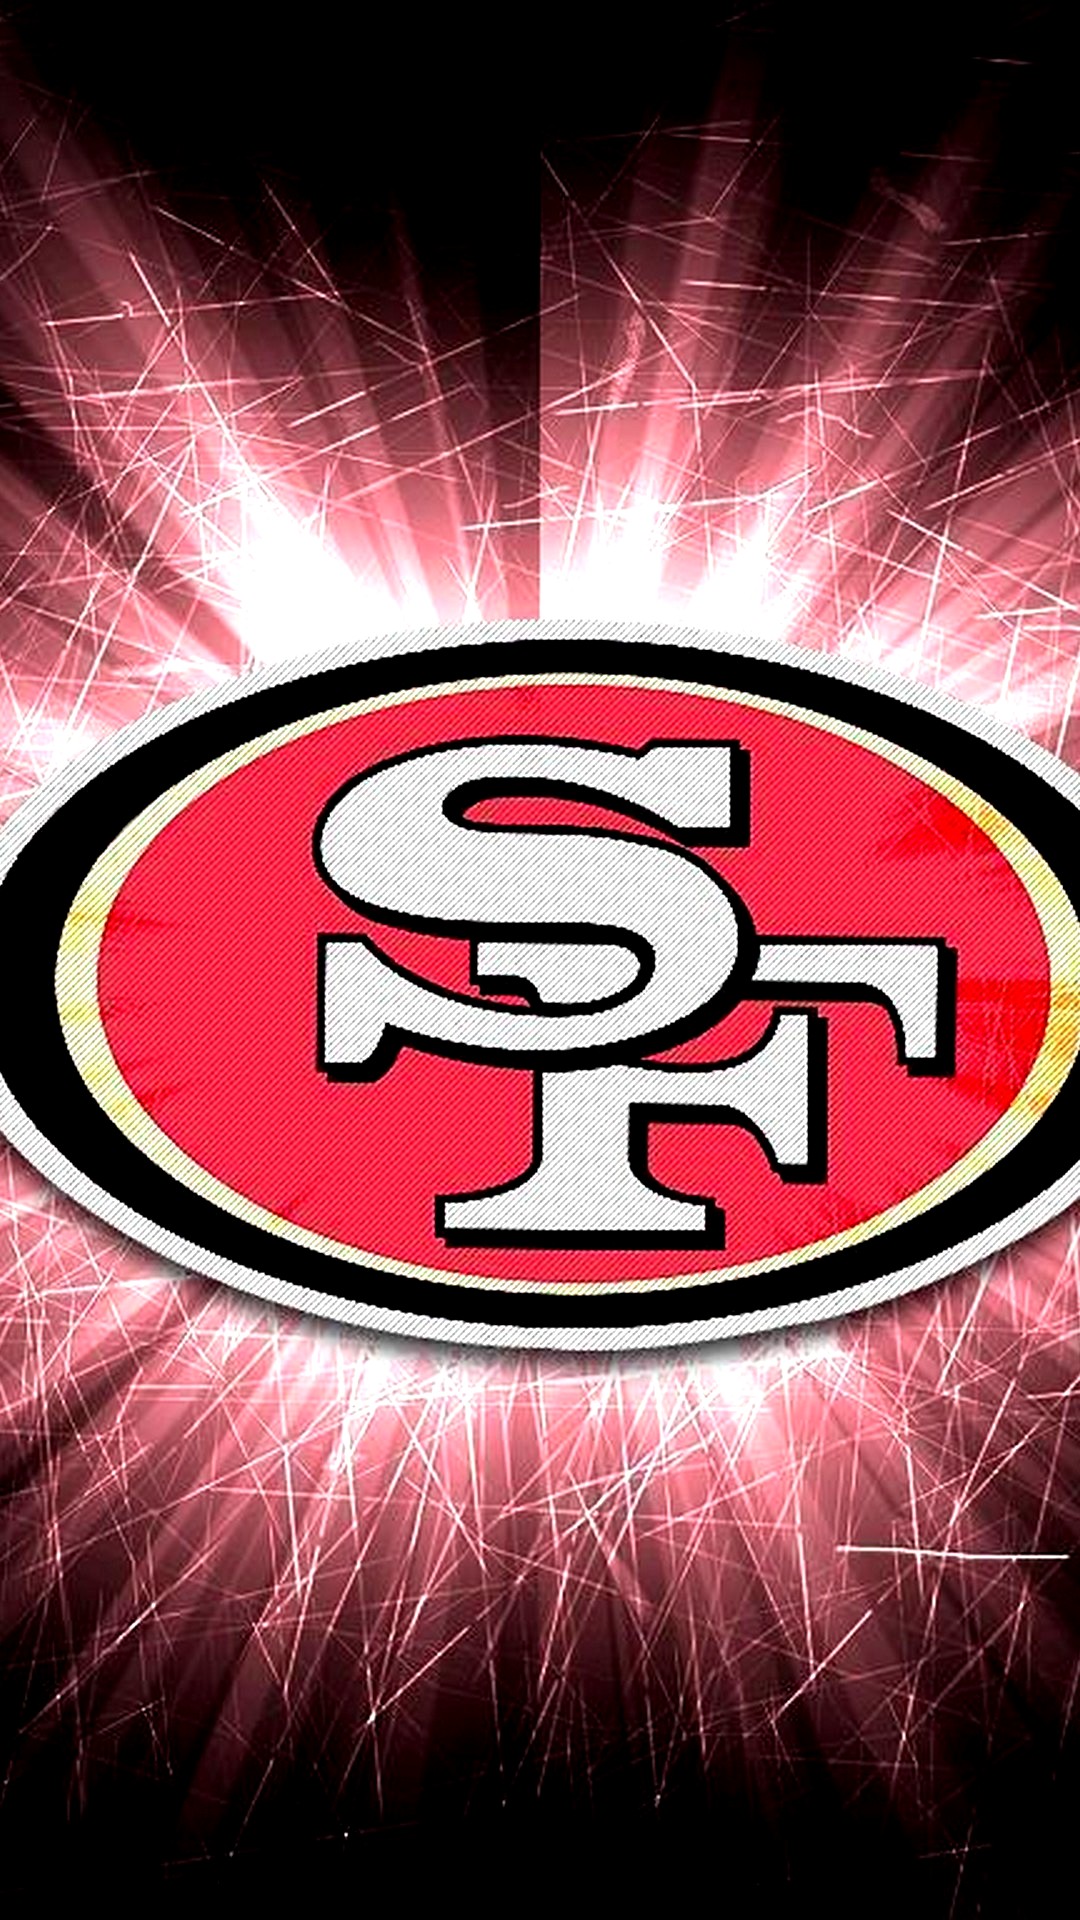 49ers iPhone Wallpaper With high-resolution 1080X1920 pixel. Download and set as wallpaper for Desktop Computer, Apple iPhone X, XS Max, XR, 8, 7, 6, SE, iPad, Android